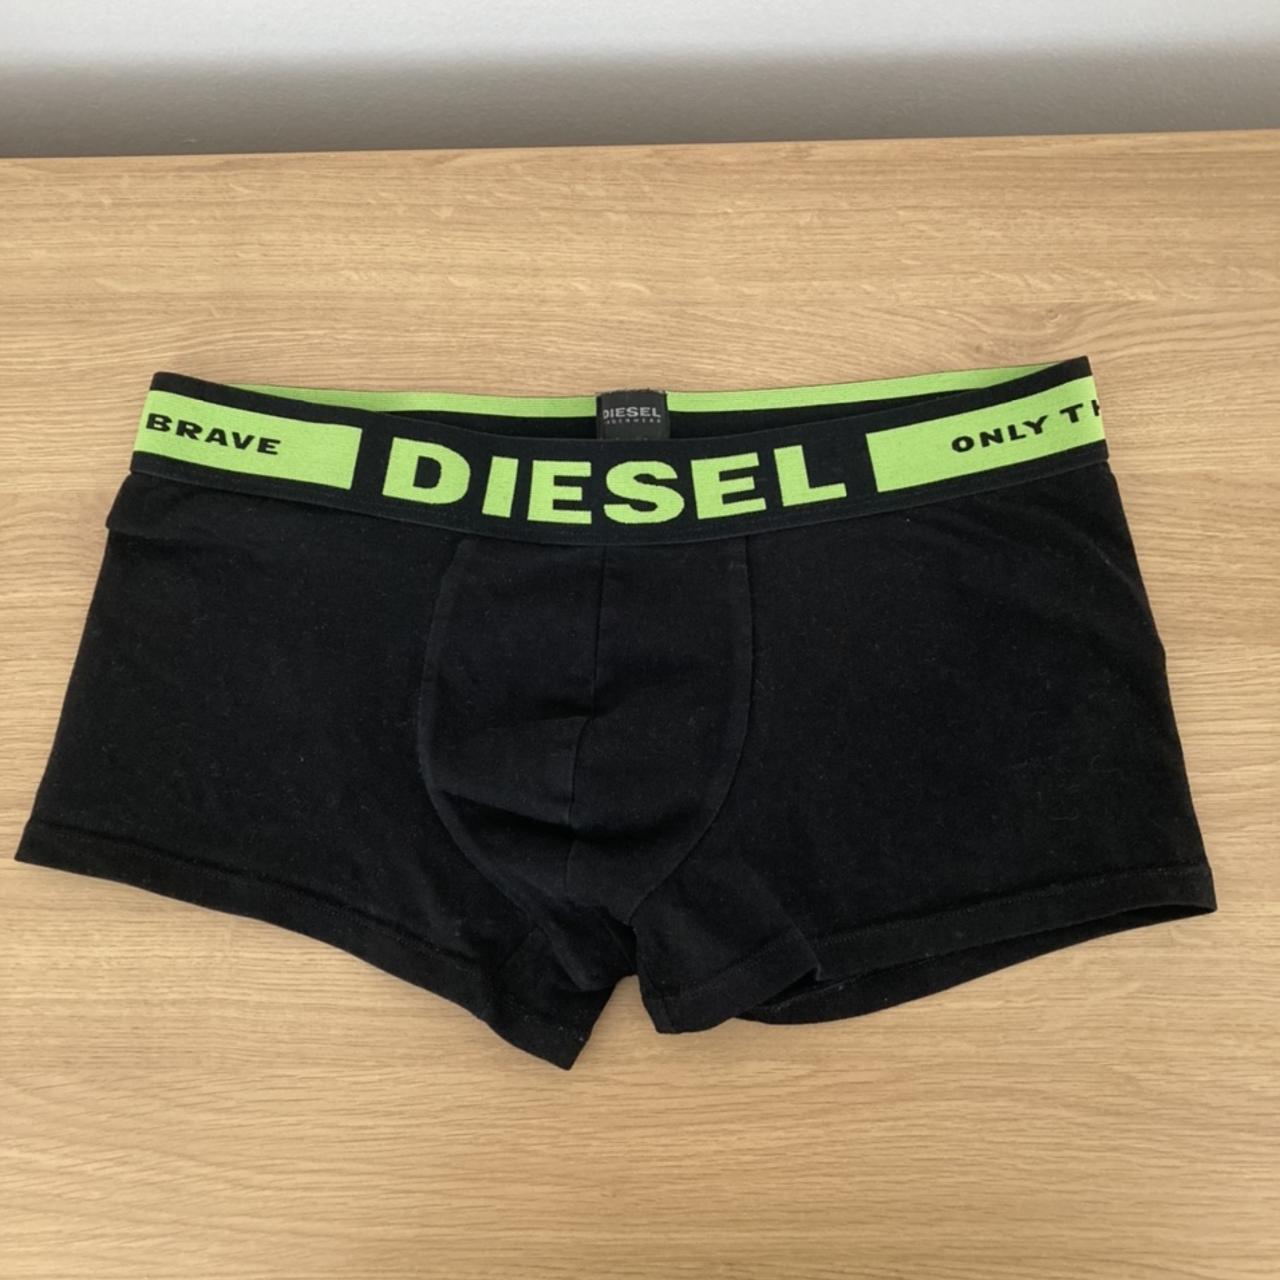 💀 Diesel boxers 4 pack - brand new without tags 🏷... - Depop